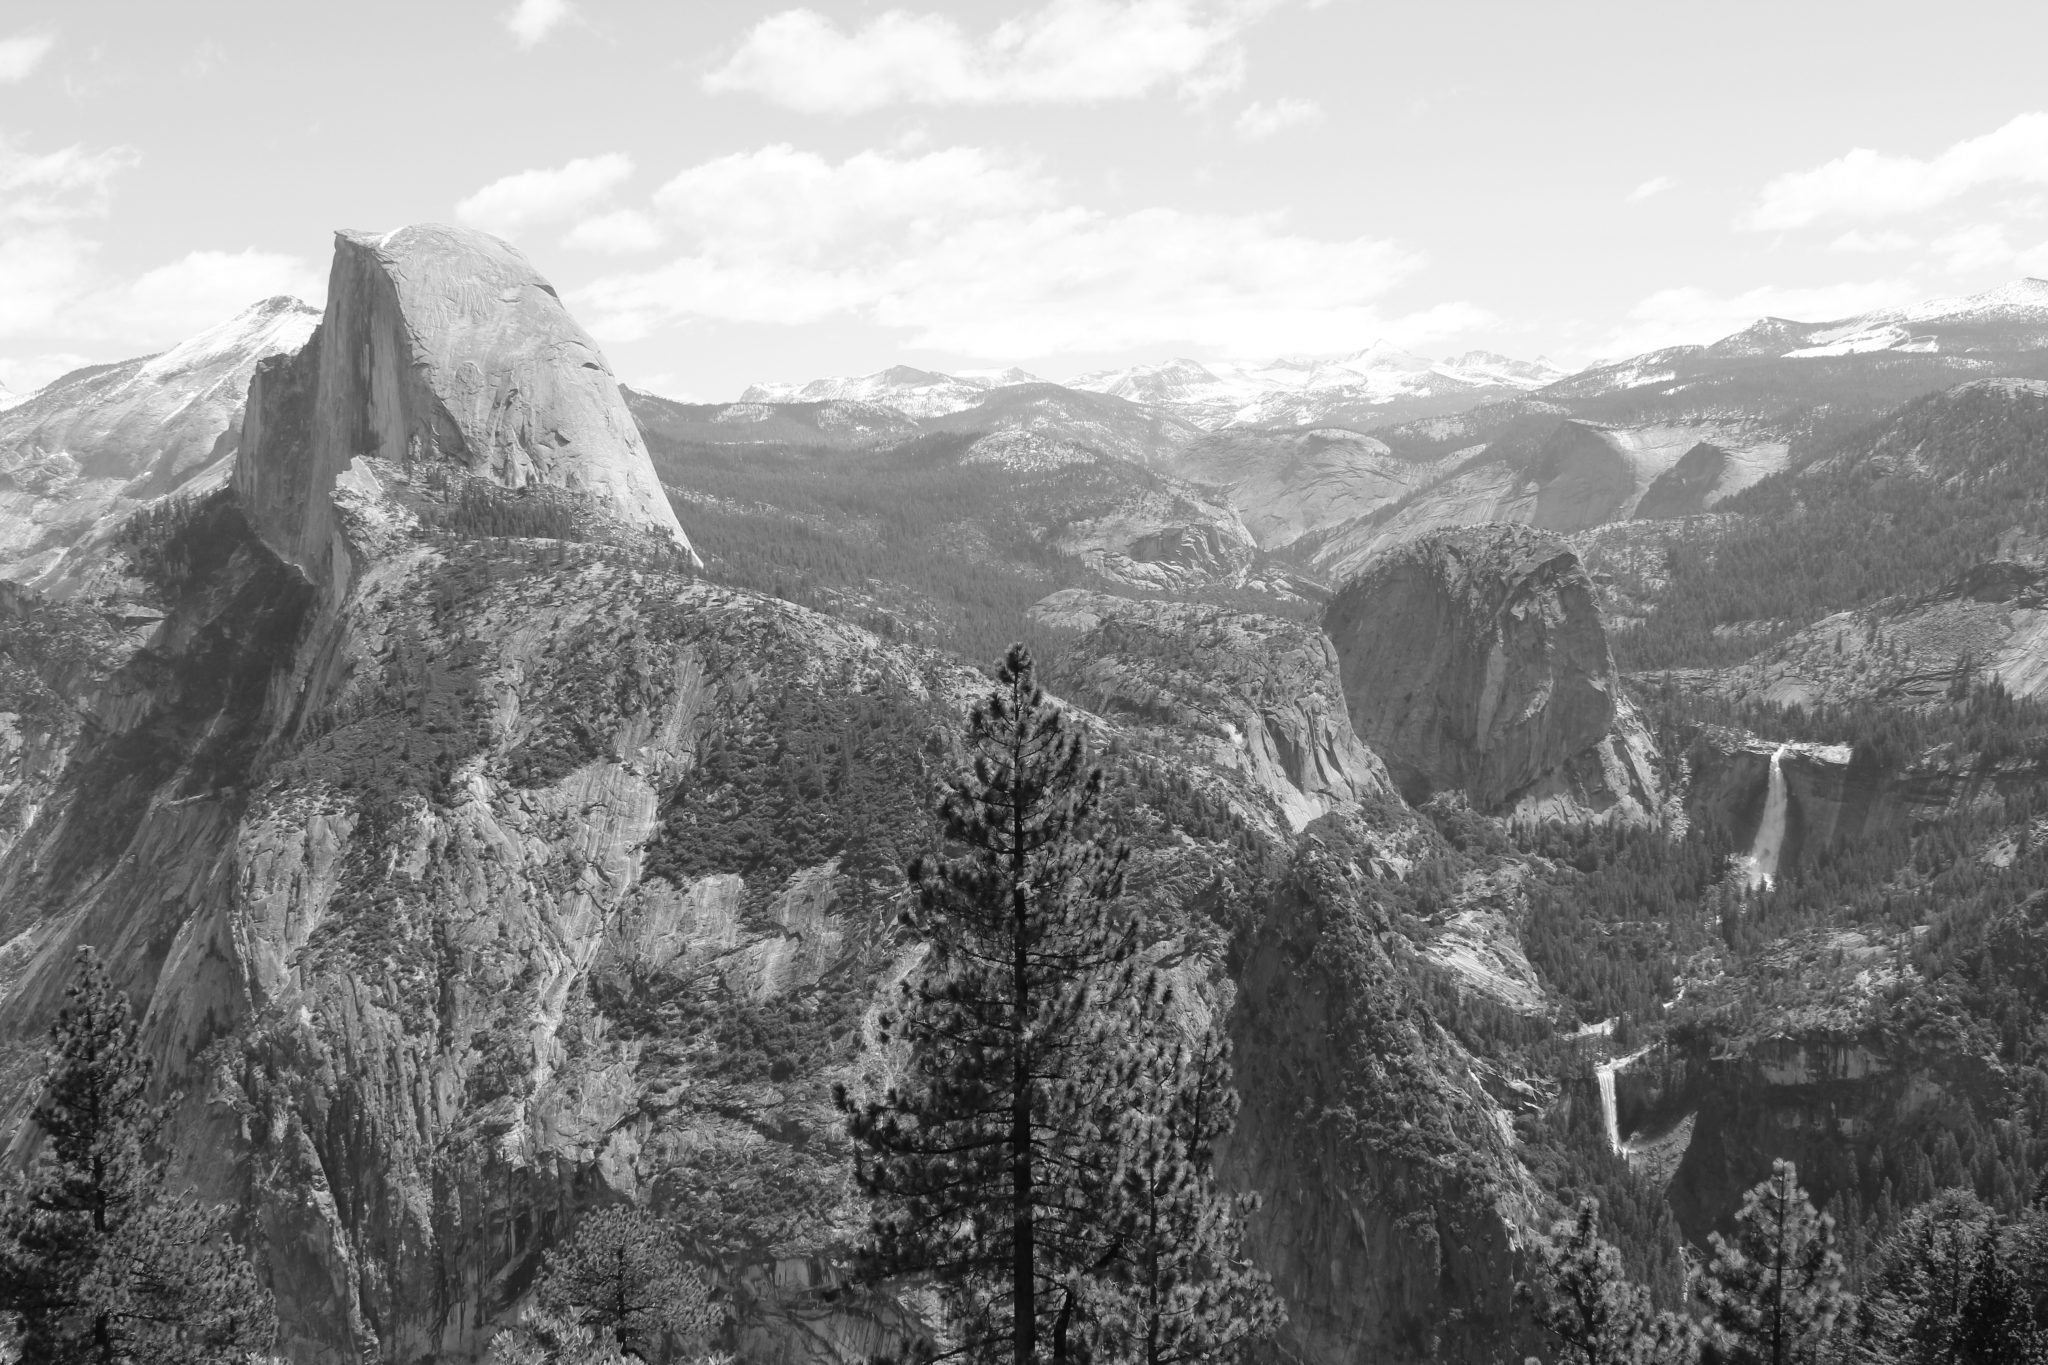 When Is The Right Time To Visit Yosemite?